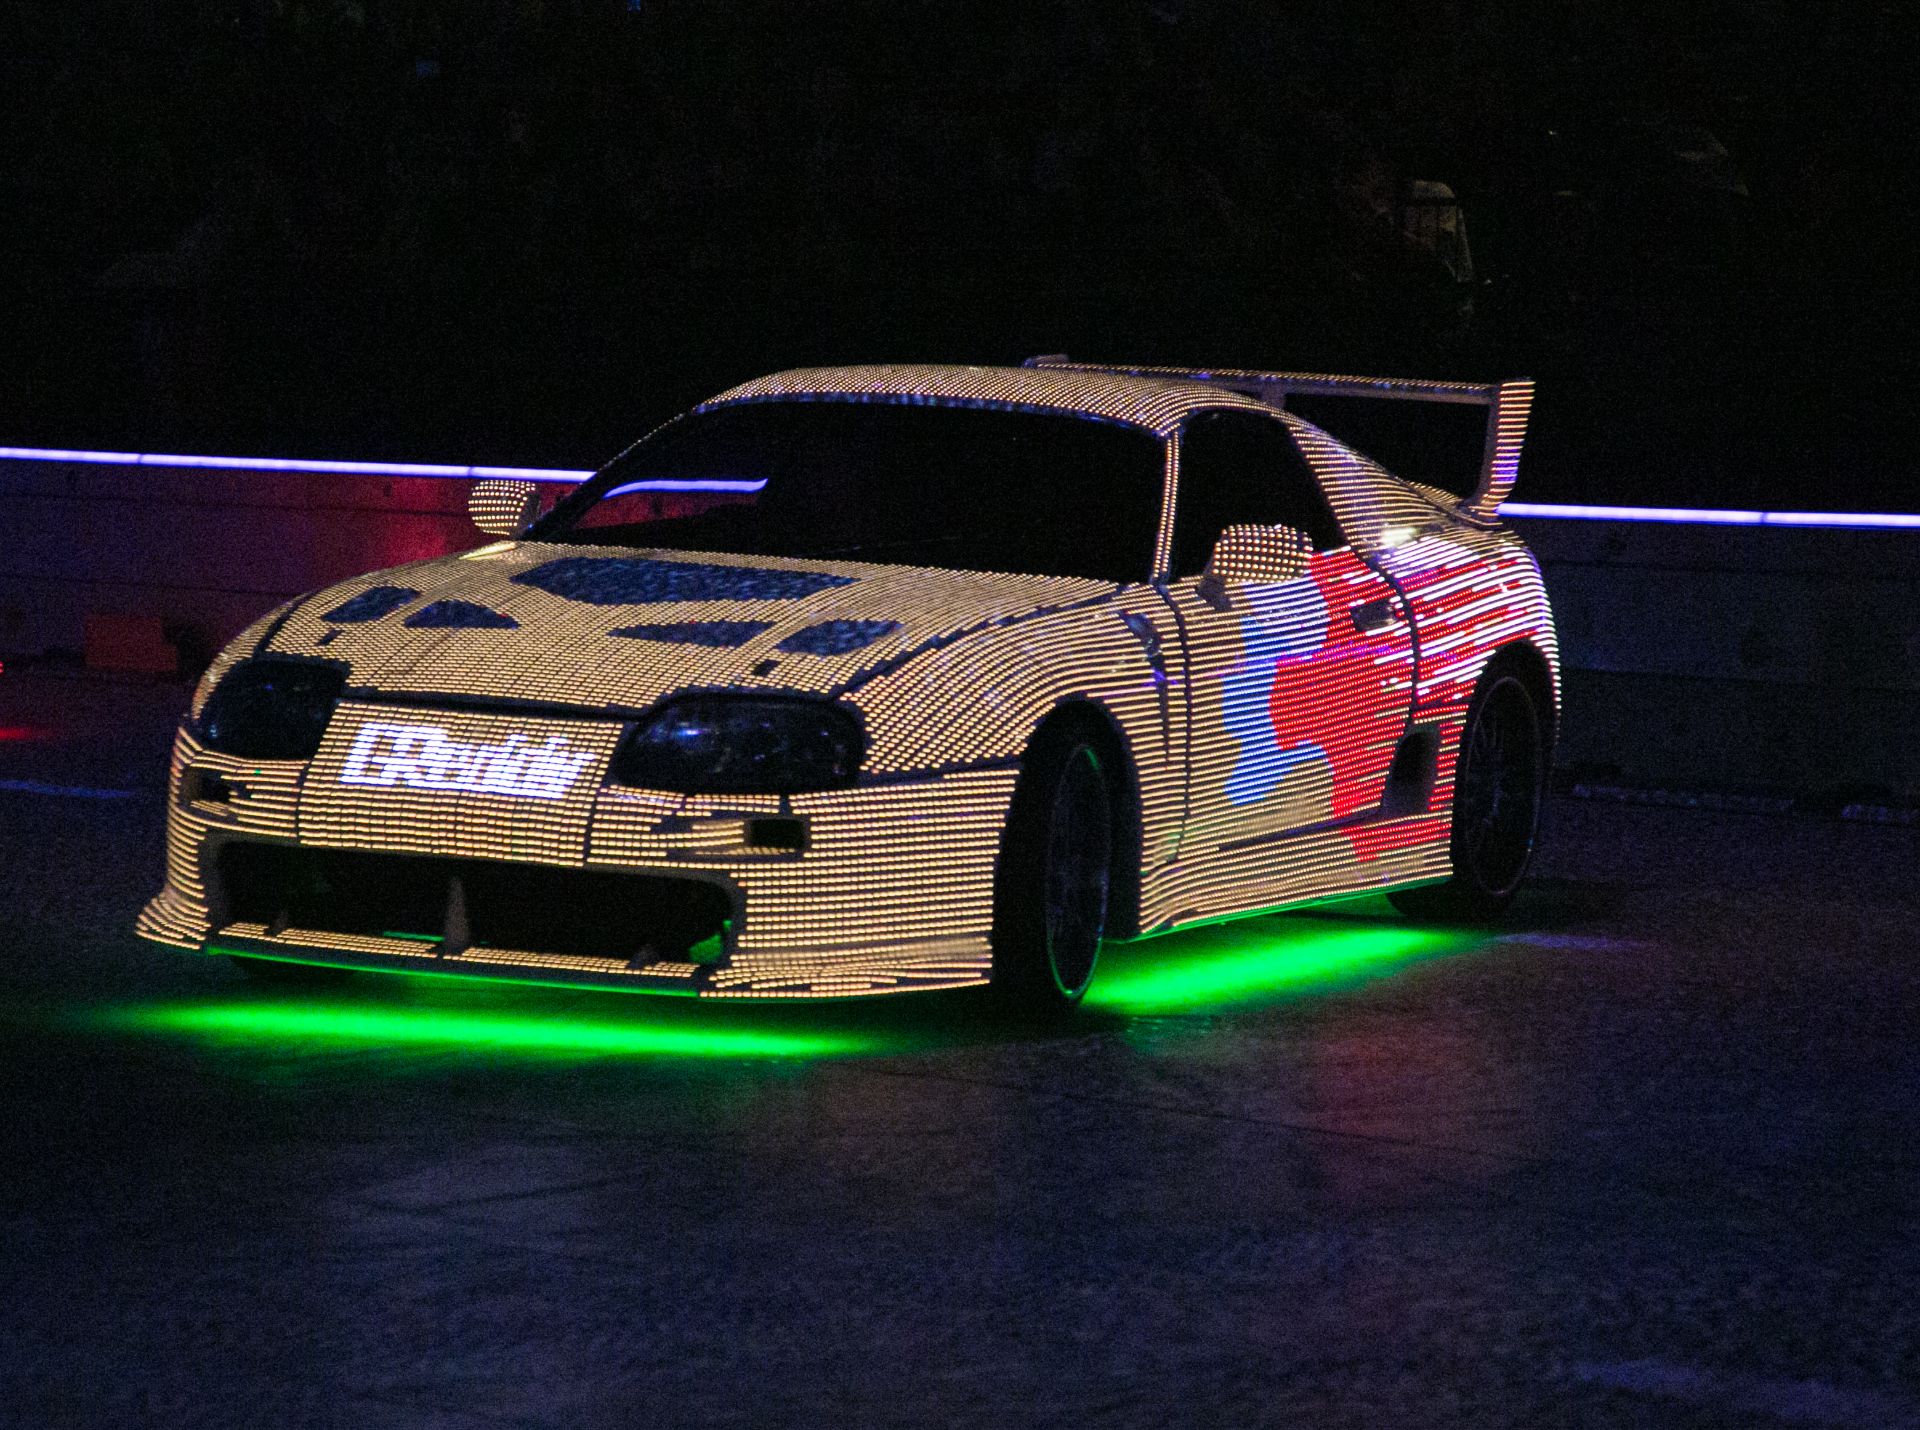 Toyota Supra RHD 2 Door Coupe, LED Lighting System Body Coverage, Ford Duratec 2.5 4 Cylinder